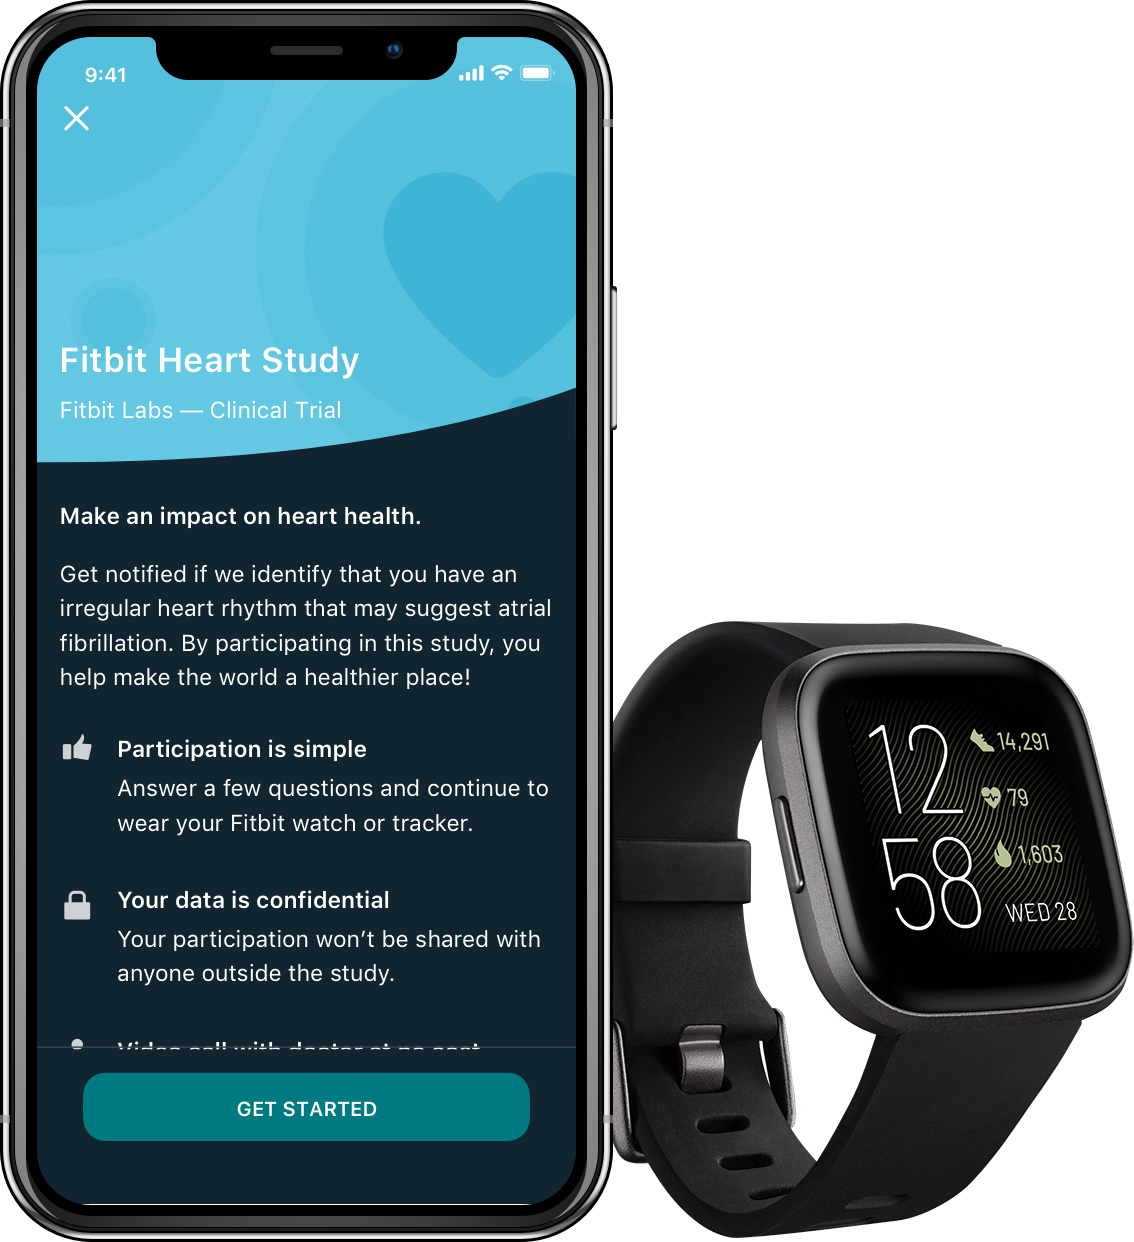 Fitbit Announces Large-Scale Study to Identify Fibrillation | Business